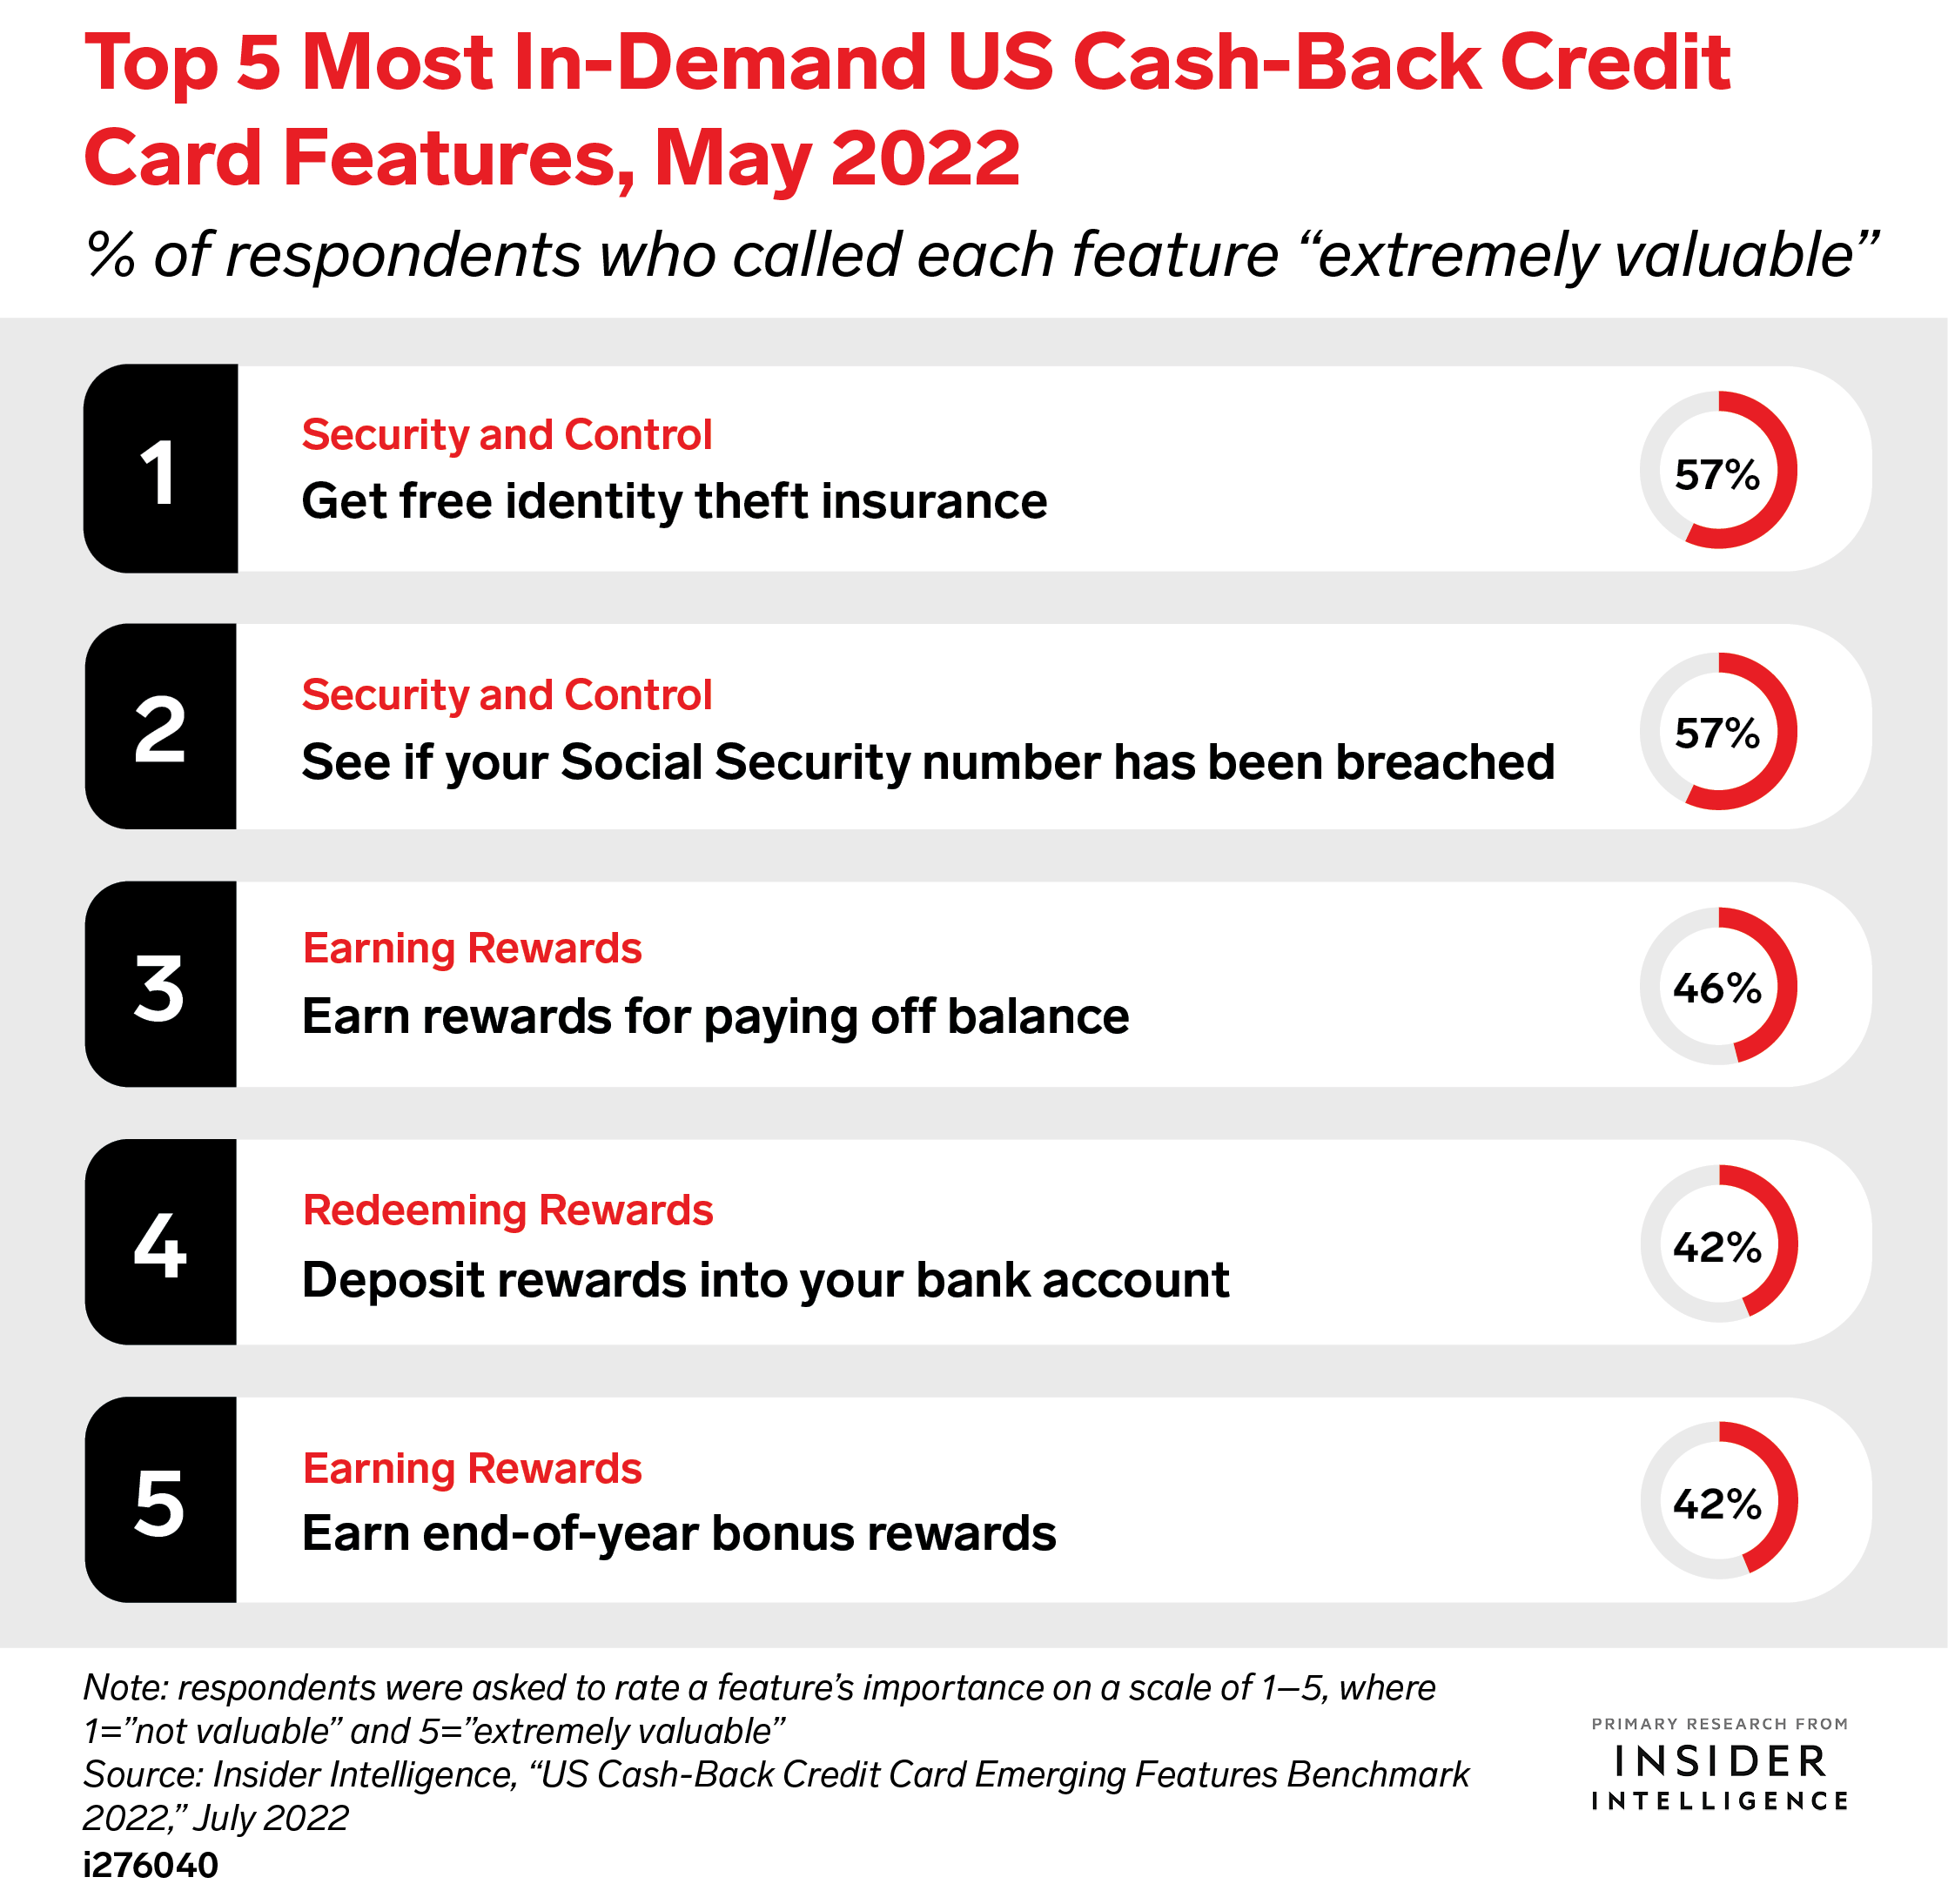 Top 5 Most In-Demand US Cash-Back Credit Card Features, May 2022 (% of respondents who called each feature 